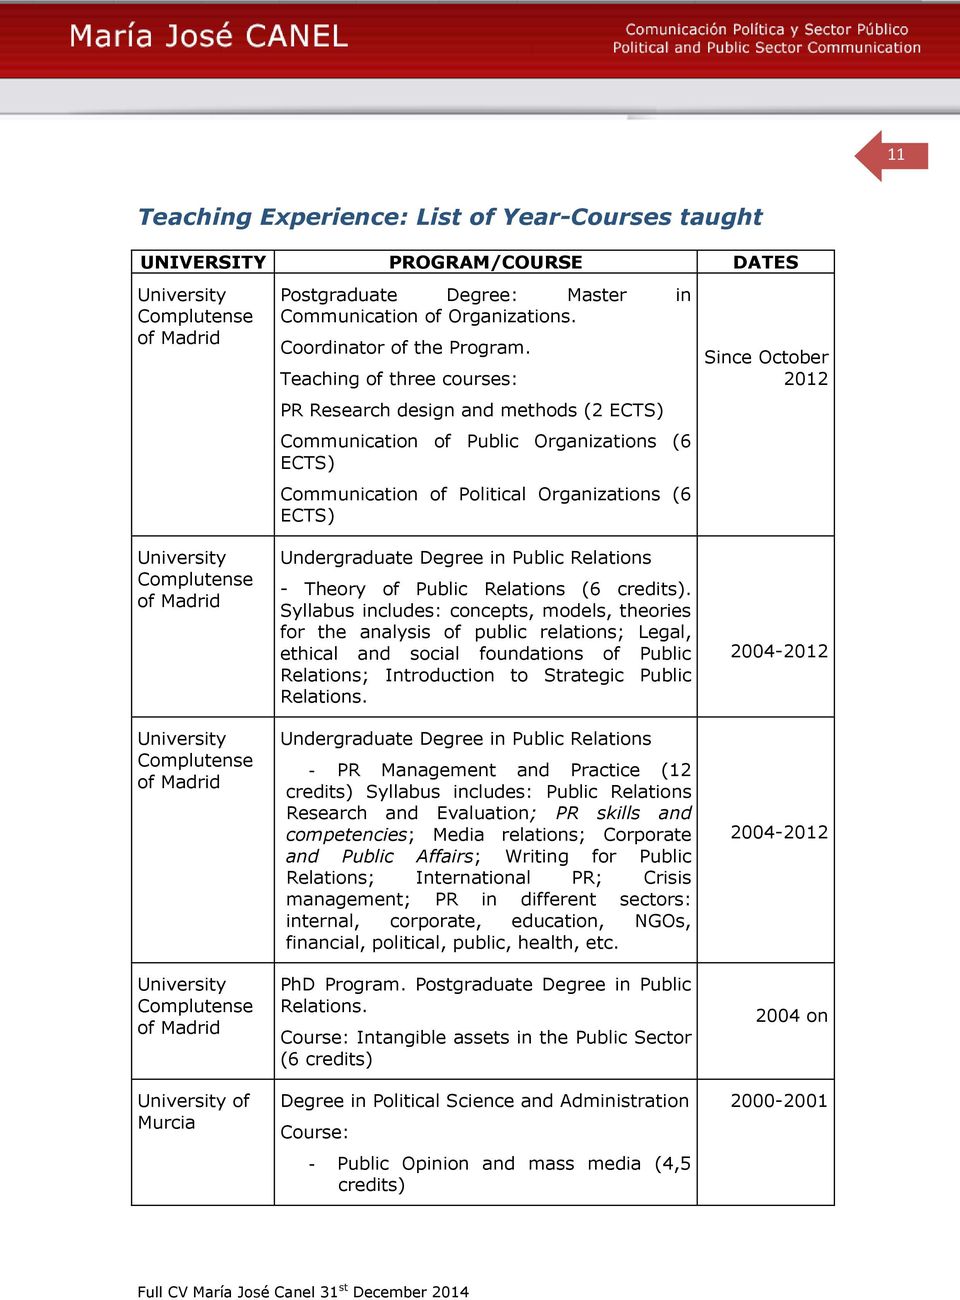 Teaching of three courses: PR Research design and methods (2 ECTS) Communication of Public Organizations (6 ECTS) Communication of Political Organizations (6 ECTS) Undergraduate Degree in Public